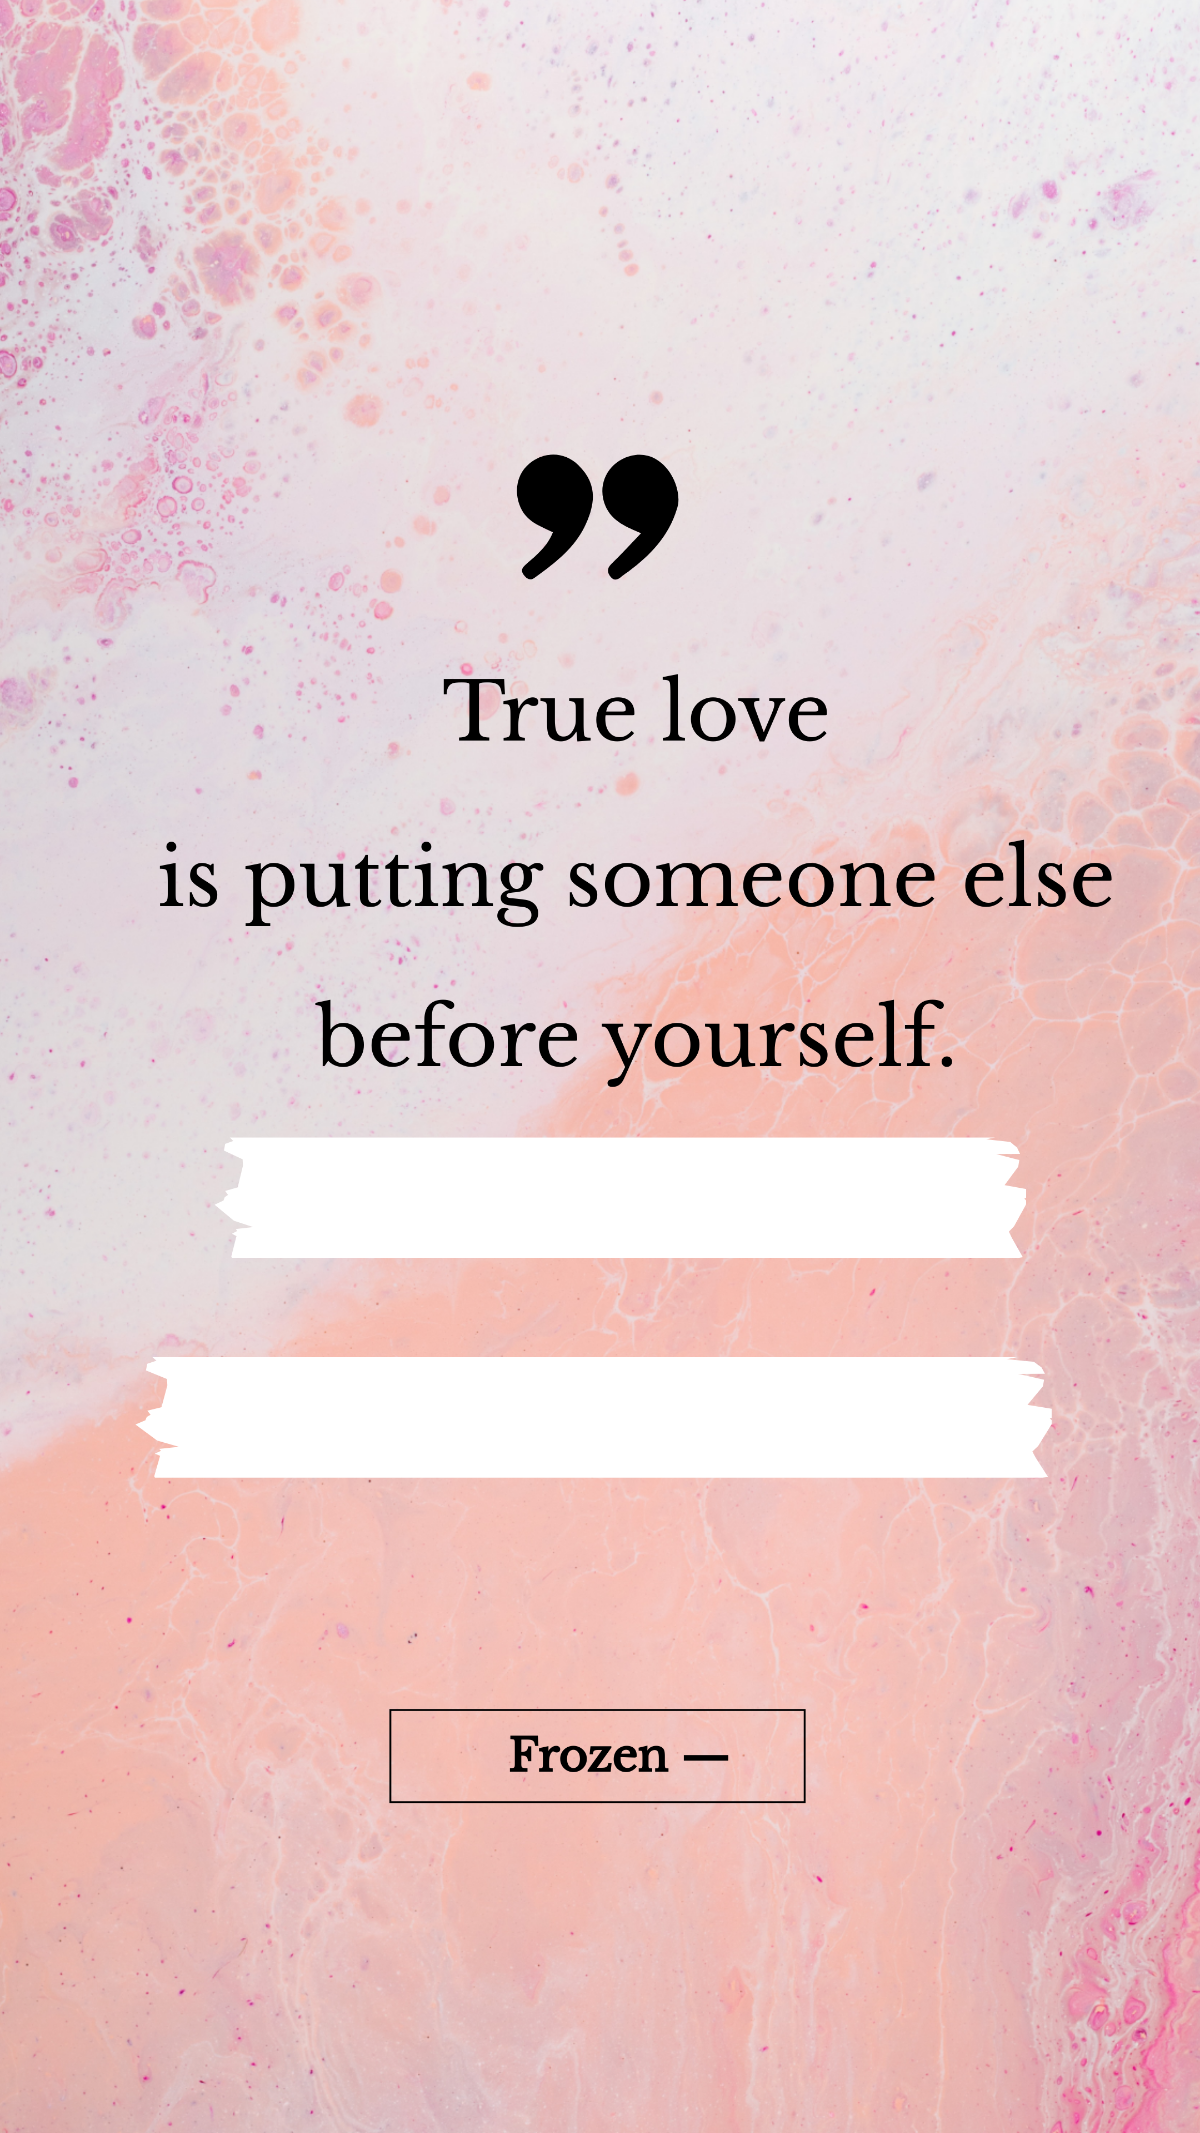 Frozen — "True love is putting someone else before yourself."